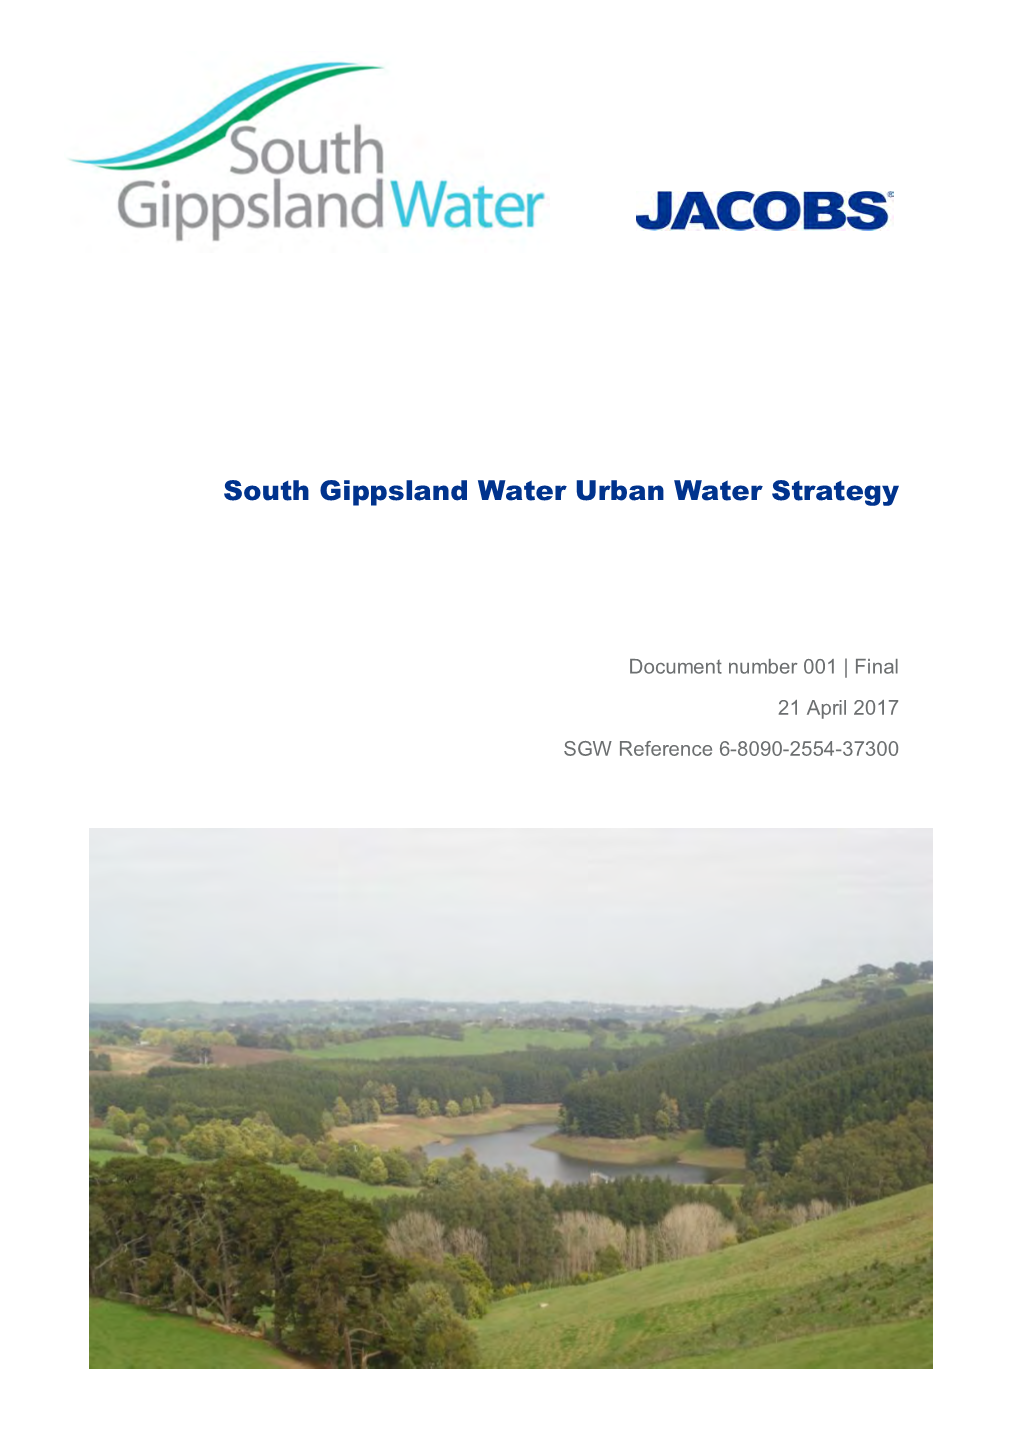 South Gippsland Water Urban Water Strategy